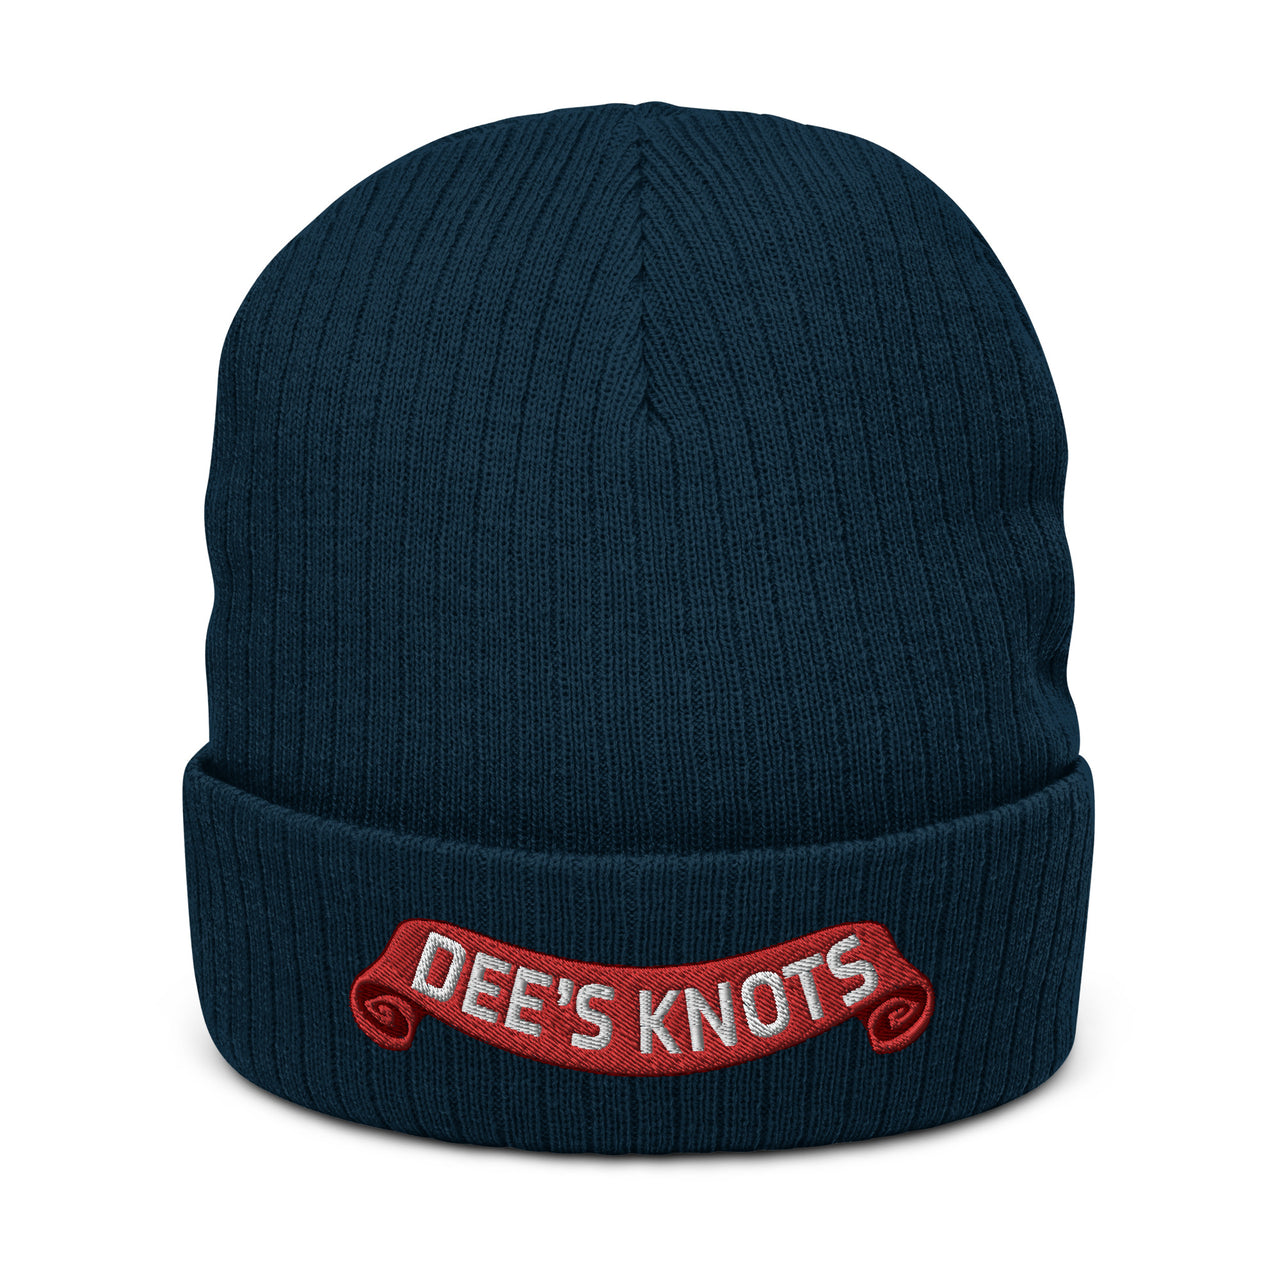 Dee's Knots- Ribbed knit beanie